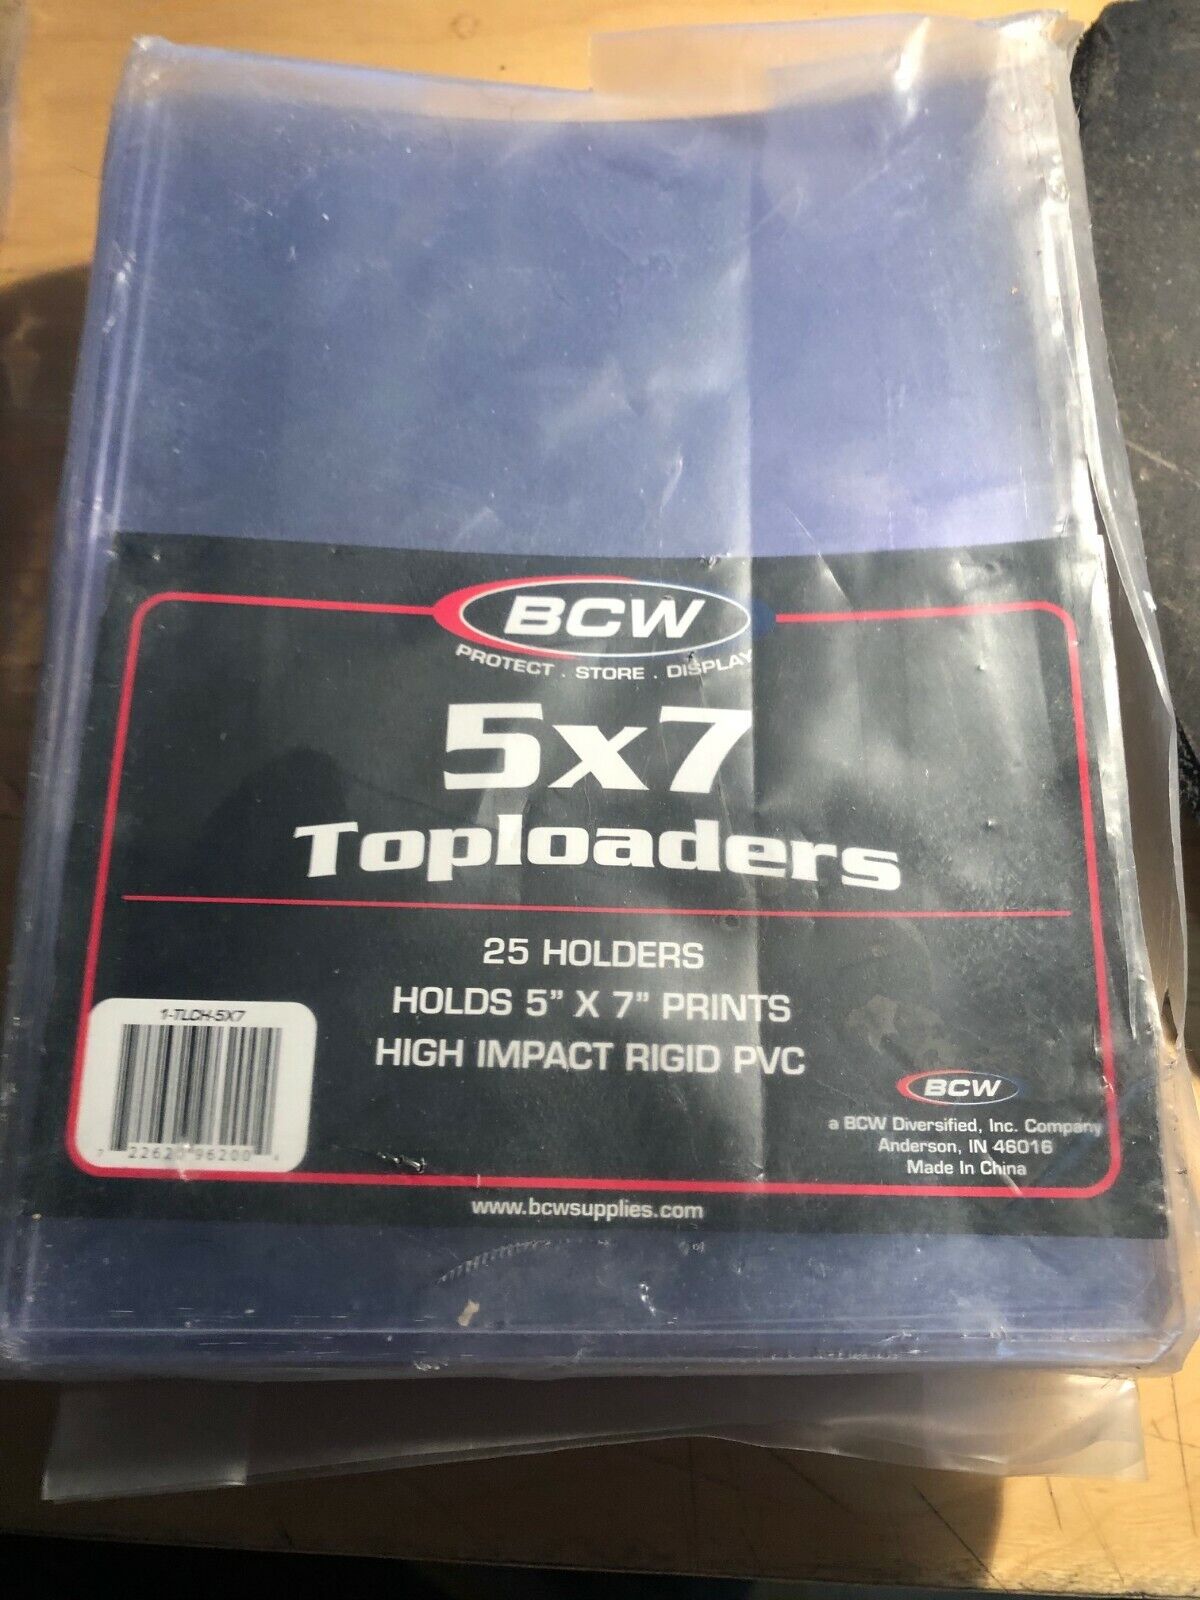 (25 Holders) BCW 5 x 7 Toploaders High Impact Rigid PVC New Factory Sealed